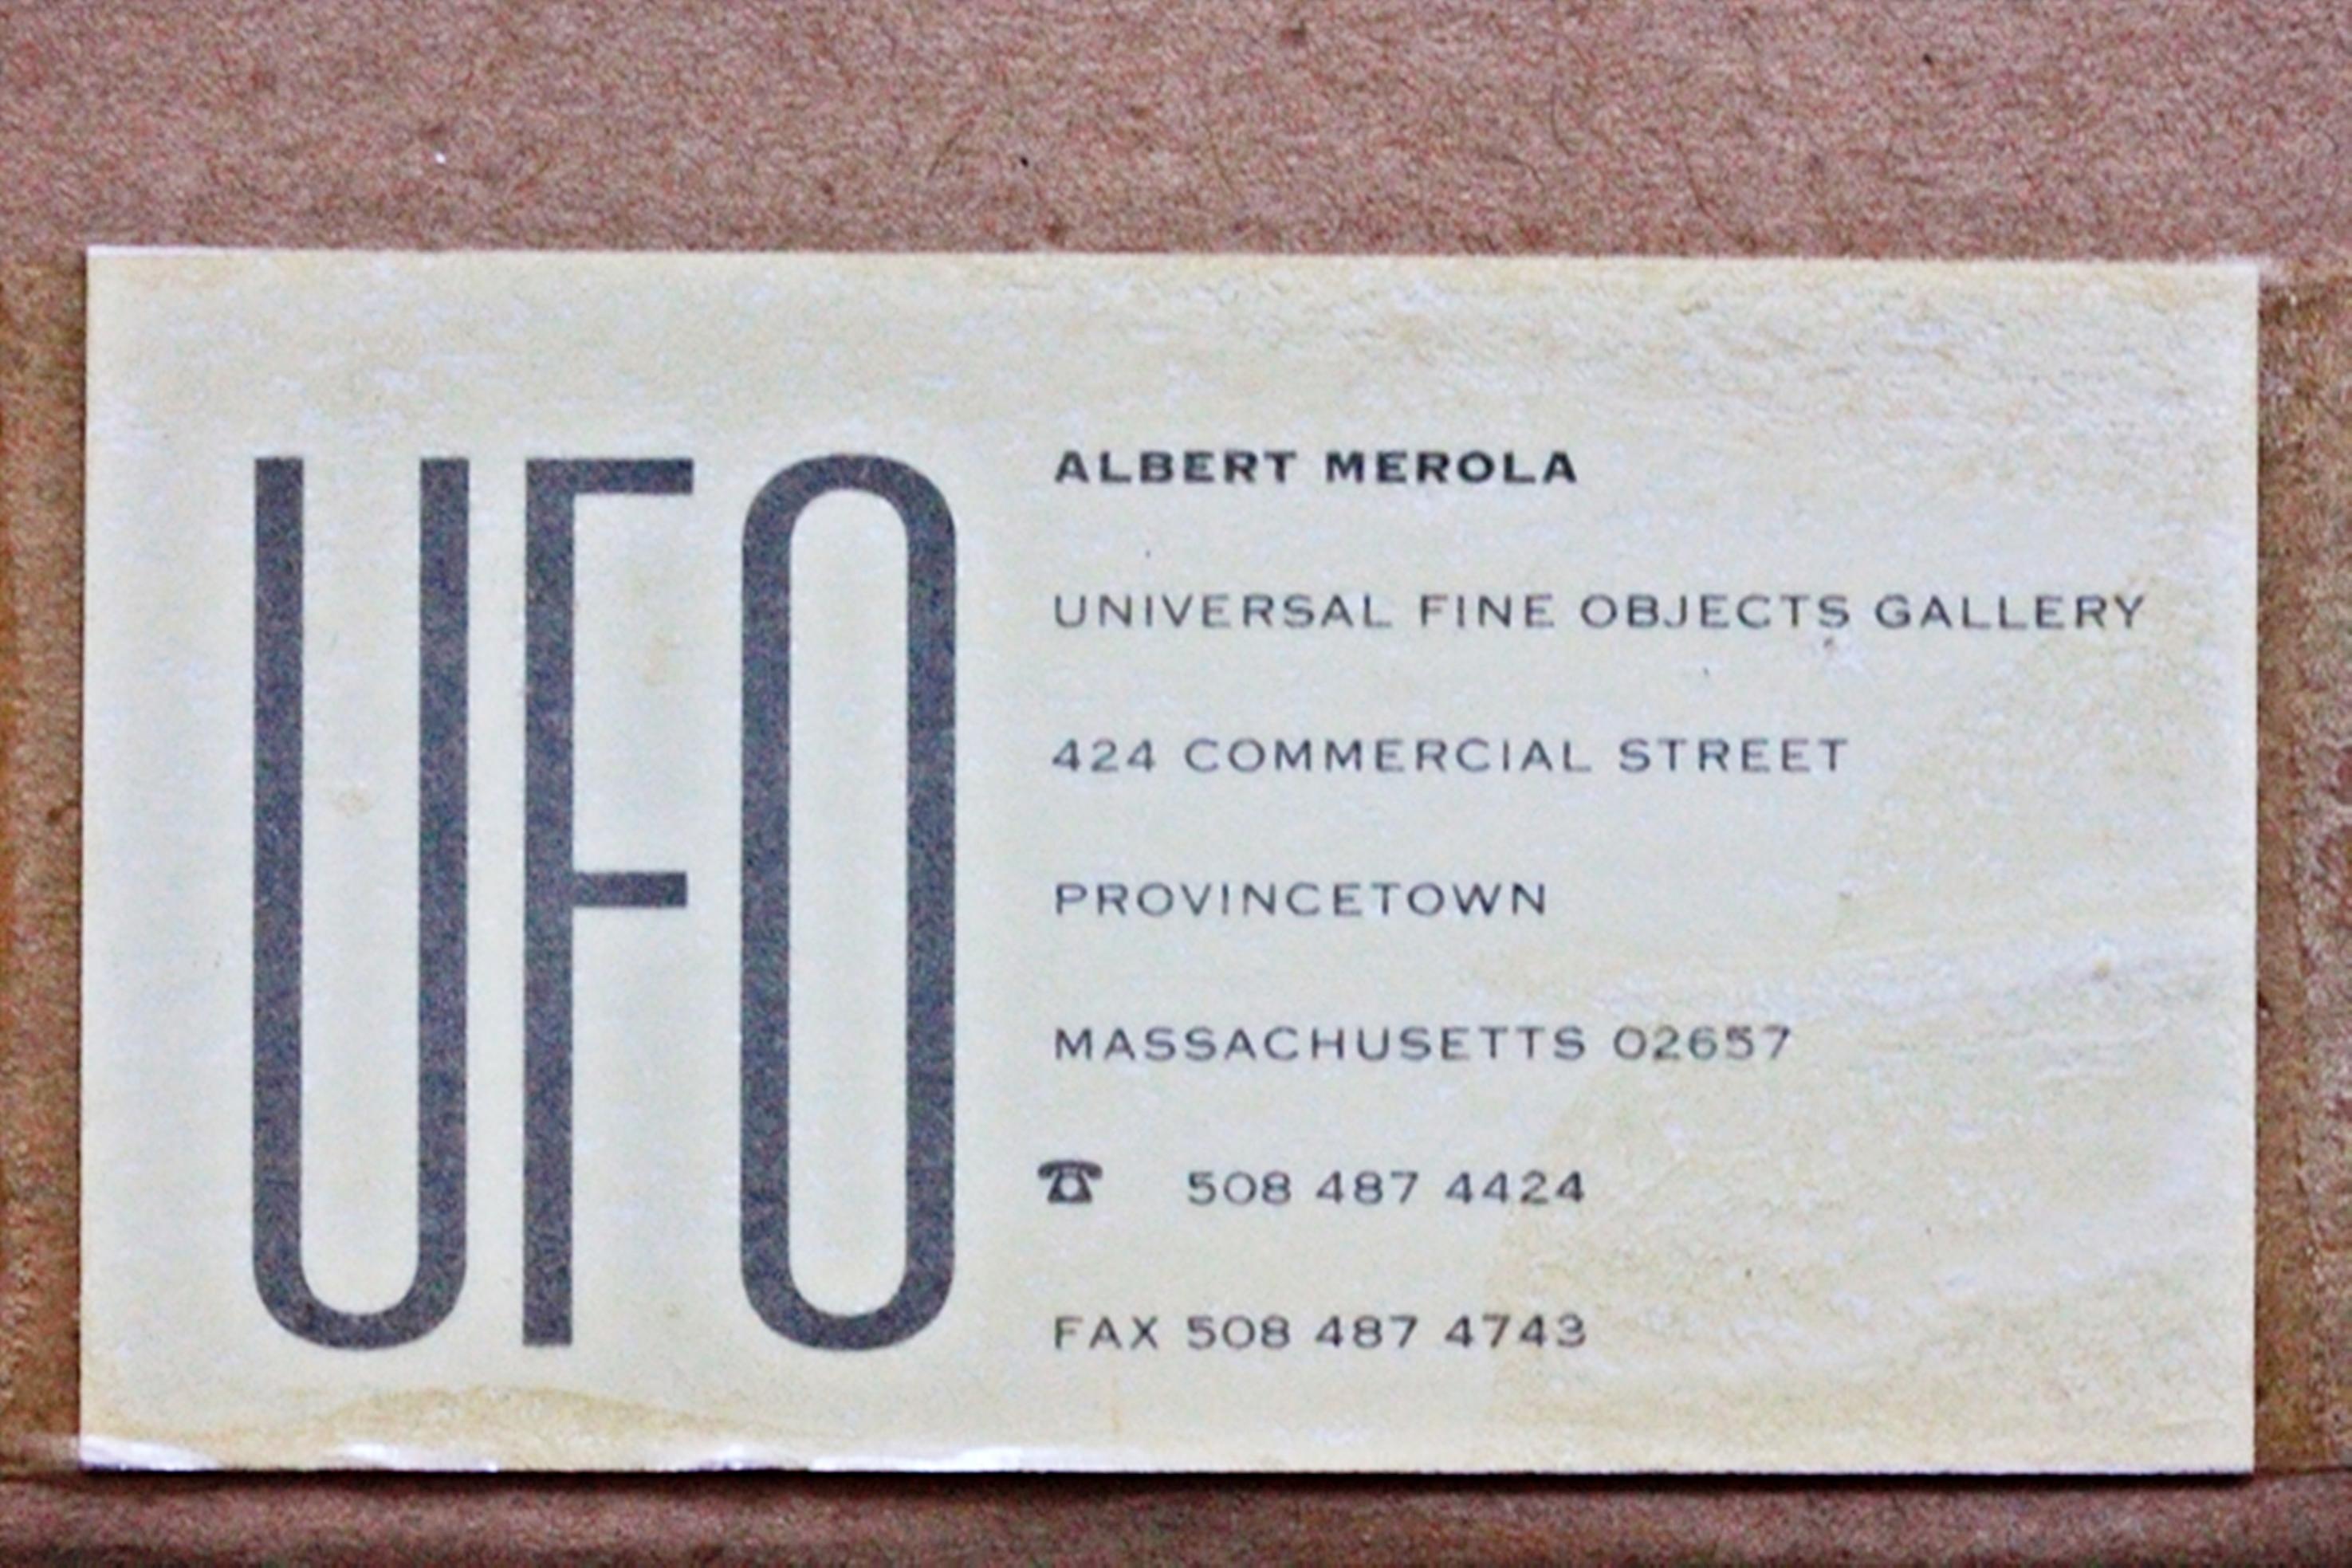 James Balla
Untitled gouache painting, 1992
Mixed Media Oil on Linen 
Signed and dated on the front of the work; the verso of the frame bears the UFO (Albert Merola) gallery label.
Frame included:
held in original vintage frame
Measurements:
Overall